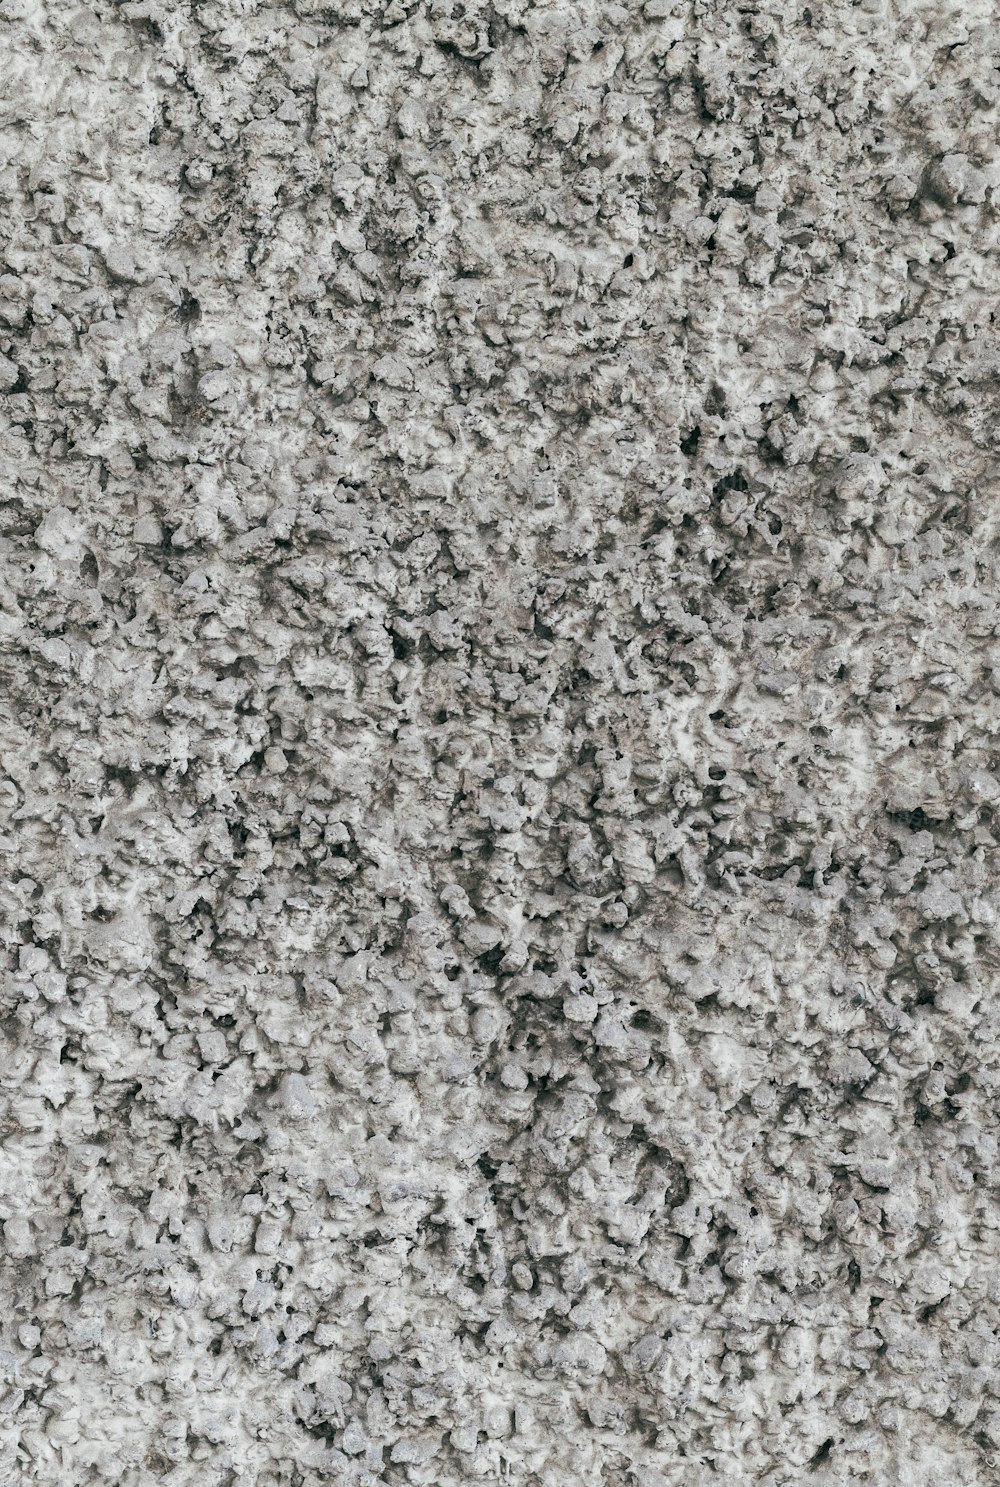 a black and white photo of a granite wall